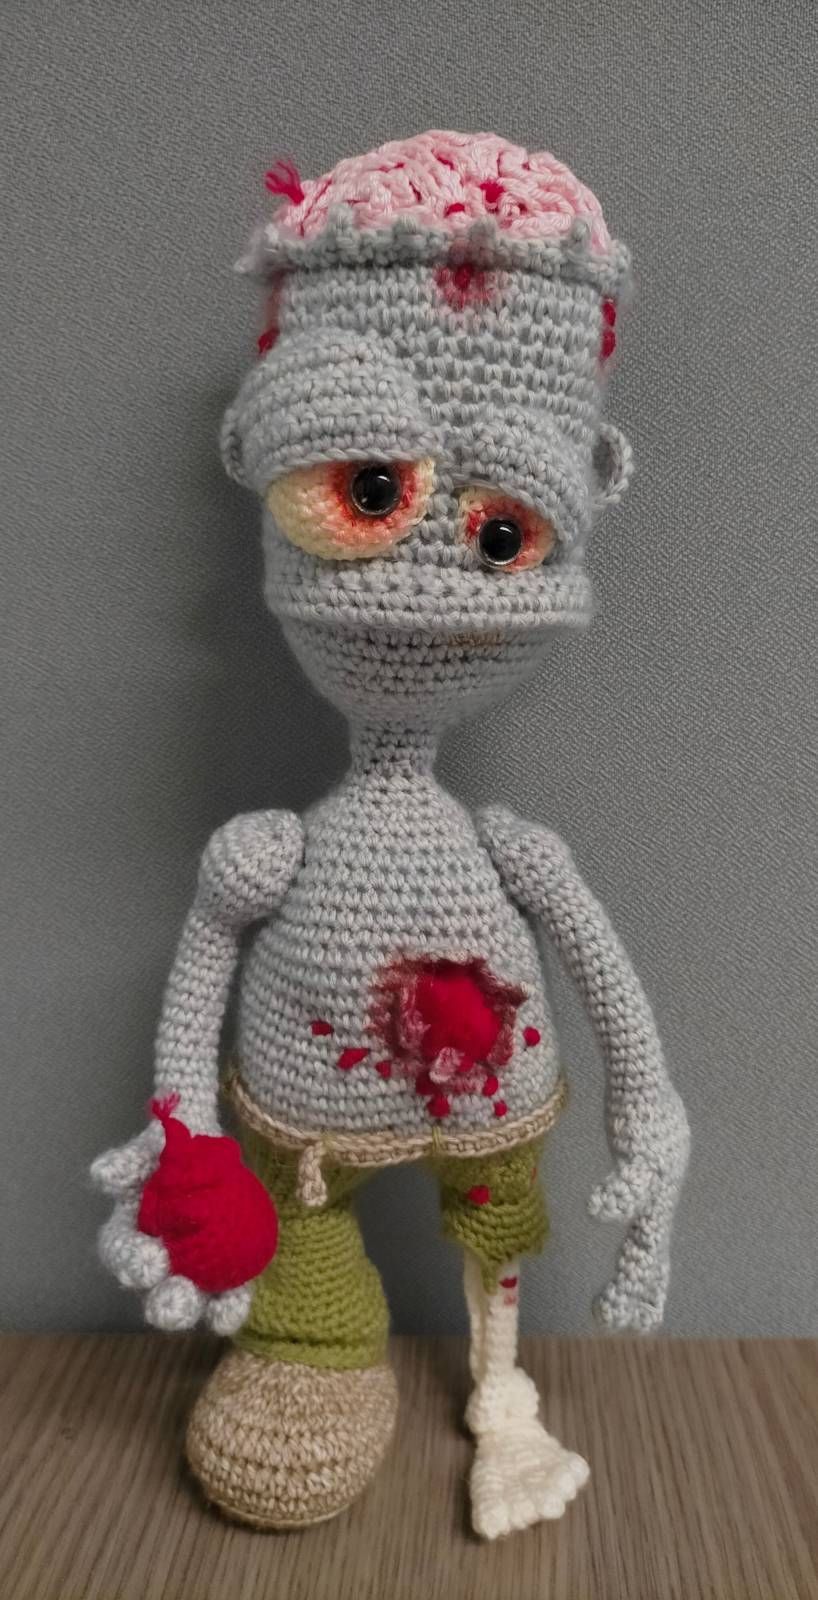 Crochet Amigurumi Zombie Review by Ingrid for Cottontail & Whiskers